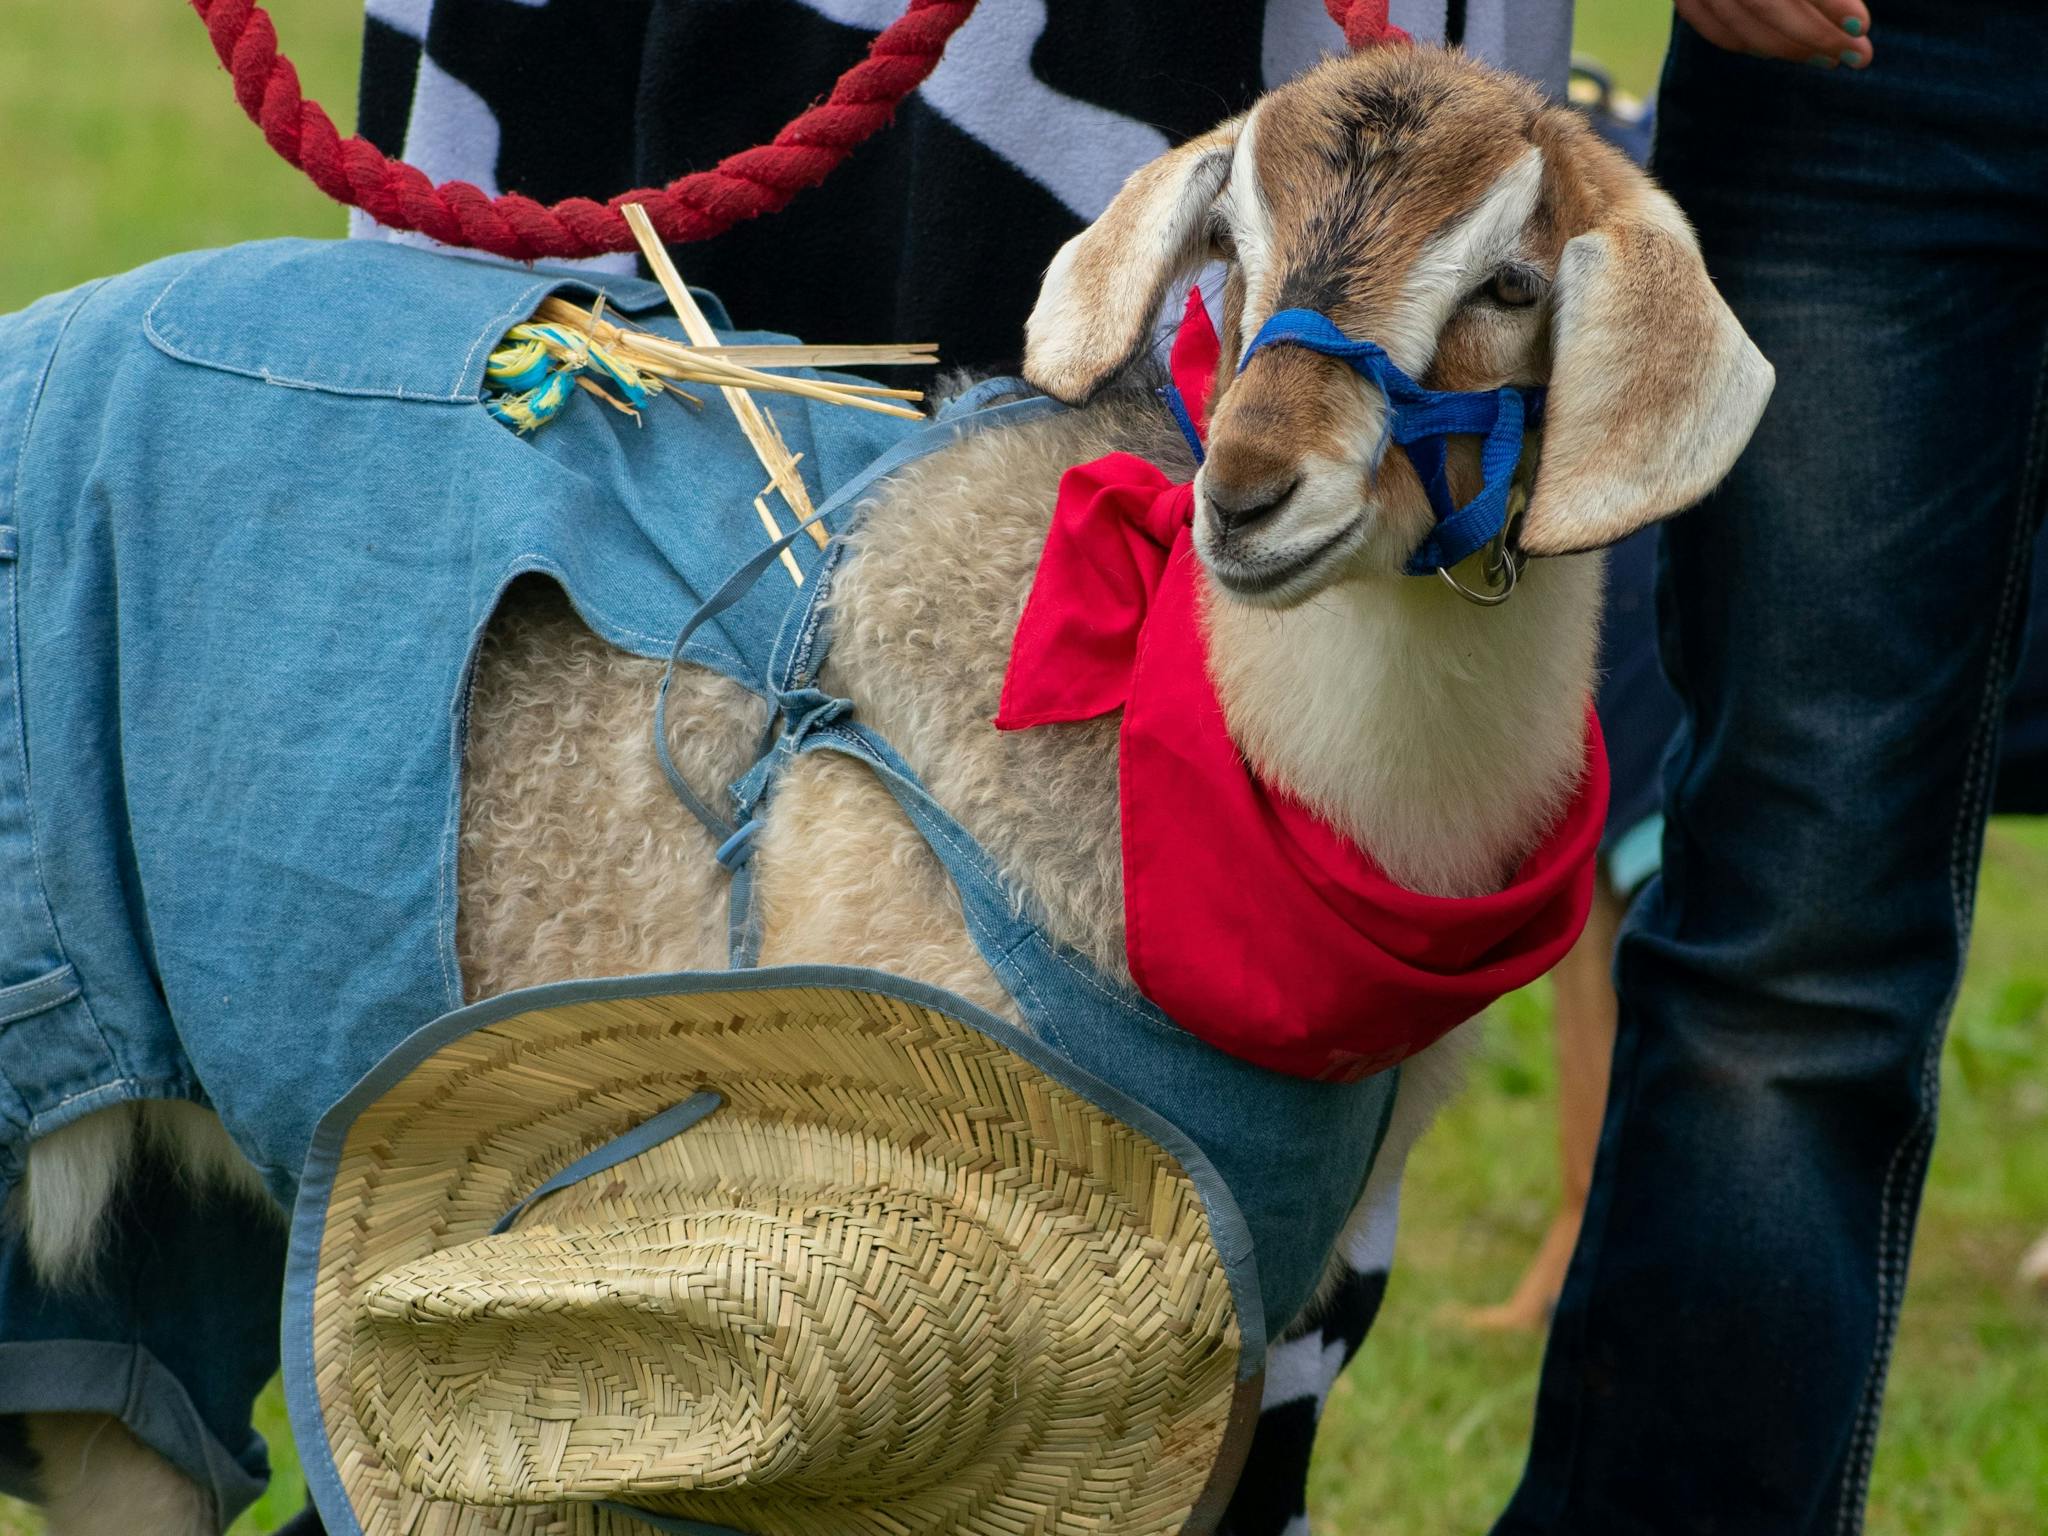 Small goat dressed in blue denim overalls and red neck scarf with straw hat around neck.